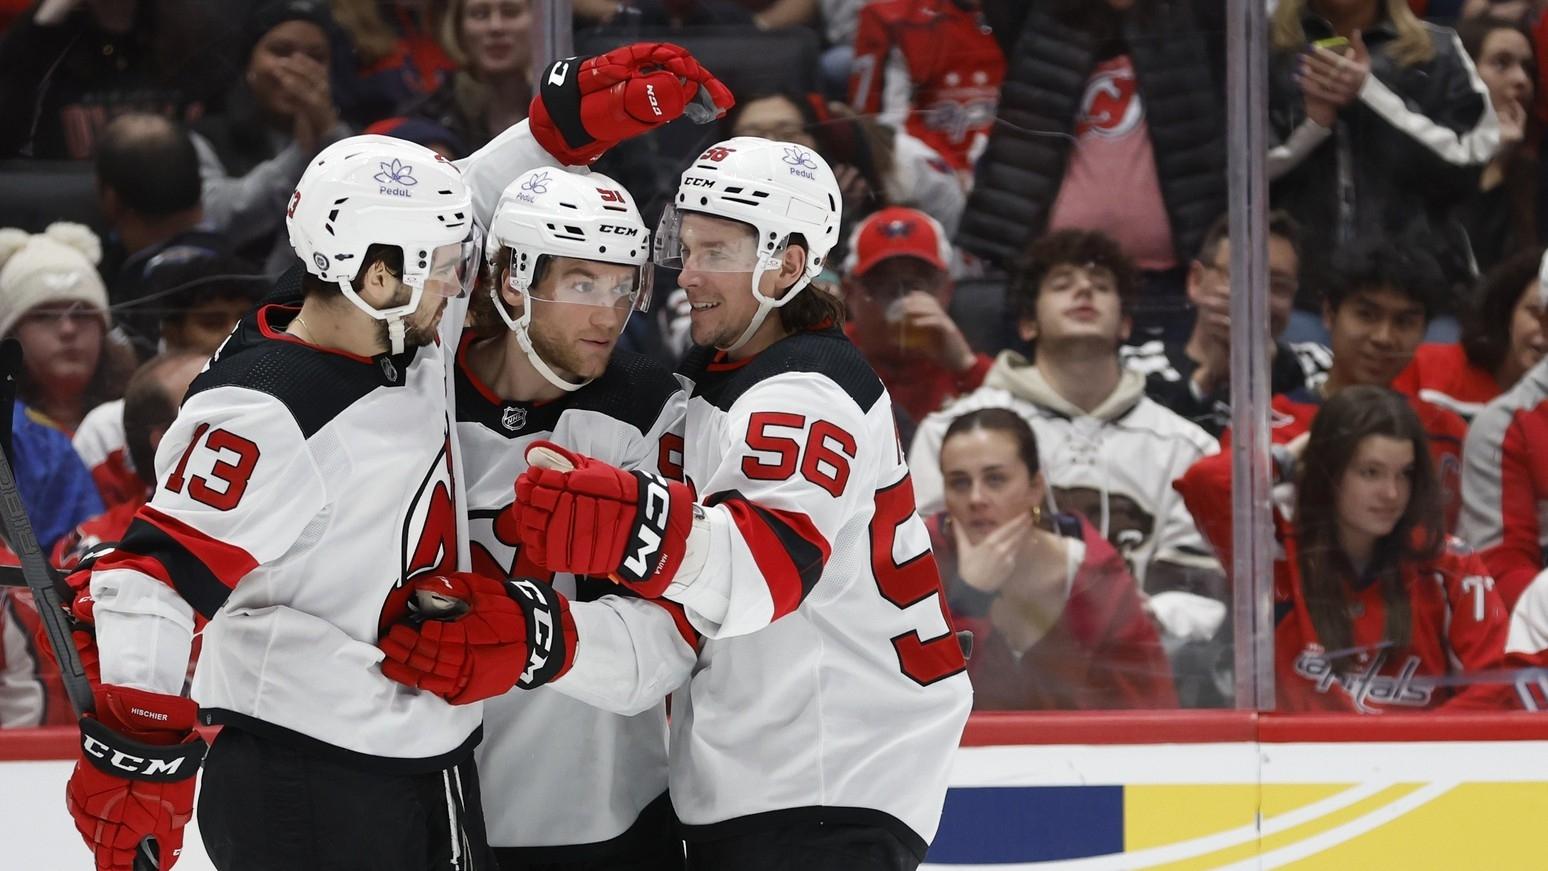 New Jersey Devils center Dawson Mercer (91) celebrates with teammates after scoring a goal against the Washington Capitals in the second period at Capital One Arena. / Geoff Burke-USA TODAY Sports